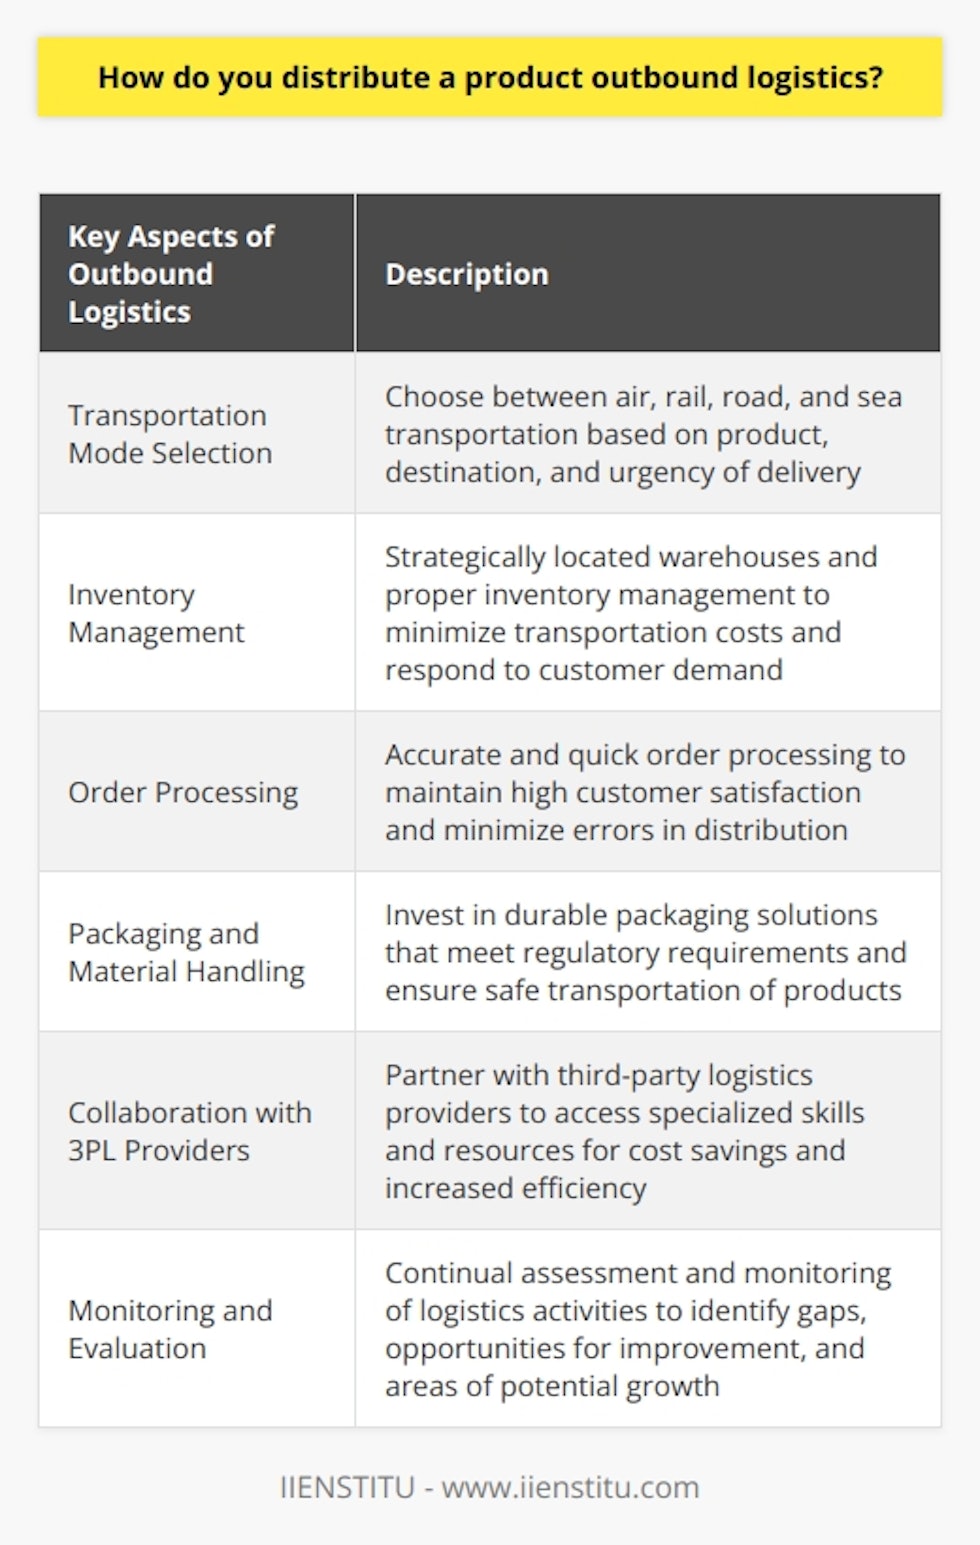 Outbound logistics refers to the process of how a company distributes its products to customers. It involves various strategies and steps to ensure the efficient movement of goods from the manufacturer to end customers. Planning and organization play a crucial role in successful product distribution.One key aspect of outbound logistics is selecting the appropriate transportation mode or combination of modes. Depending on factors such as the product, destination, and urgency of delivery, companies can choose between air, rail, road, and sea transportation. This decision is important to minimize transit time and transportation costs, while also ensuring the safety and quality of the product.Efficient inventory management and warehousing are also essential for smooth outbound logistics. Companies need strategically located warehouses that minimize transportation costs and can quickly respond to customer demand. Proper inventory management helps avoid stockouts or excess inventory, which can result in financial losses and damage to the brand reputation.Accurate and quick order processing is necessary to maintain high customer satisfaction and minimize errors in the distribution process. Streamlined order tracking and confirmation systems are necessary for proper communication and reducing the chances of delays and mistakes in delivering products to customers.Packaging and material handling are vital for ensuring the safety and quality of products during transportation. Companies must invest in durable packaging solutions that meet regulatory requirements and protect products from damage or spoiling. Proper material handling equipment and policies are also crucial for efficient loading and unloading processes, staff safety, and reducing the risk of damage during transportation.To enhance outbound logistics, companies often collaborate with third-party logistics (3PL) providers. These providers offer specialized skills and resources that contribute to cost savings and increased efficiency in the distribution process. Establishing strong relationships with trustworthy and experienced 3PL providers can also provide access to updated technology and industry expertise without heavy investment.Monitoring and evaluation are important aspects of outbound logistics. By continually assessing and monitoring logistics activities, companies can identify gaps in the distribution process, opportunities for improvement, and areas of potential growth. This allows them to make informed adjustments and investments that align with their overall business objectives and ensure effective and efficient product delivery to customers.In conclusion, outbound logistics involves several key steps and strategies, including transportation mode selection, inventory management, order processing, packaging and material handling, collaboration with 3PL providers, and monitoring and evaluation. By paying attention to these aspects, companies can ensure the efficient distribution of their products to end customers.